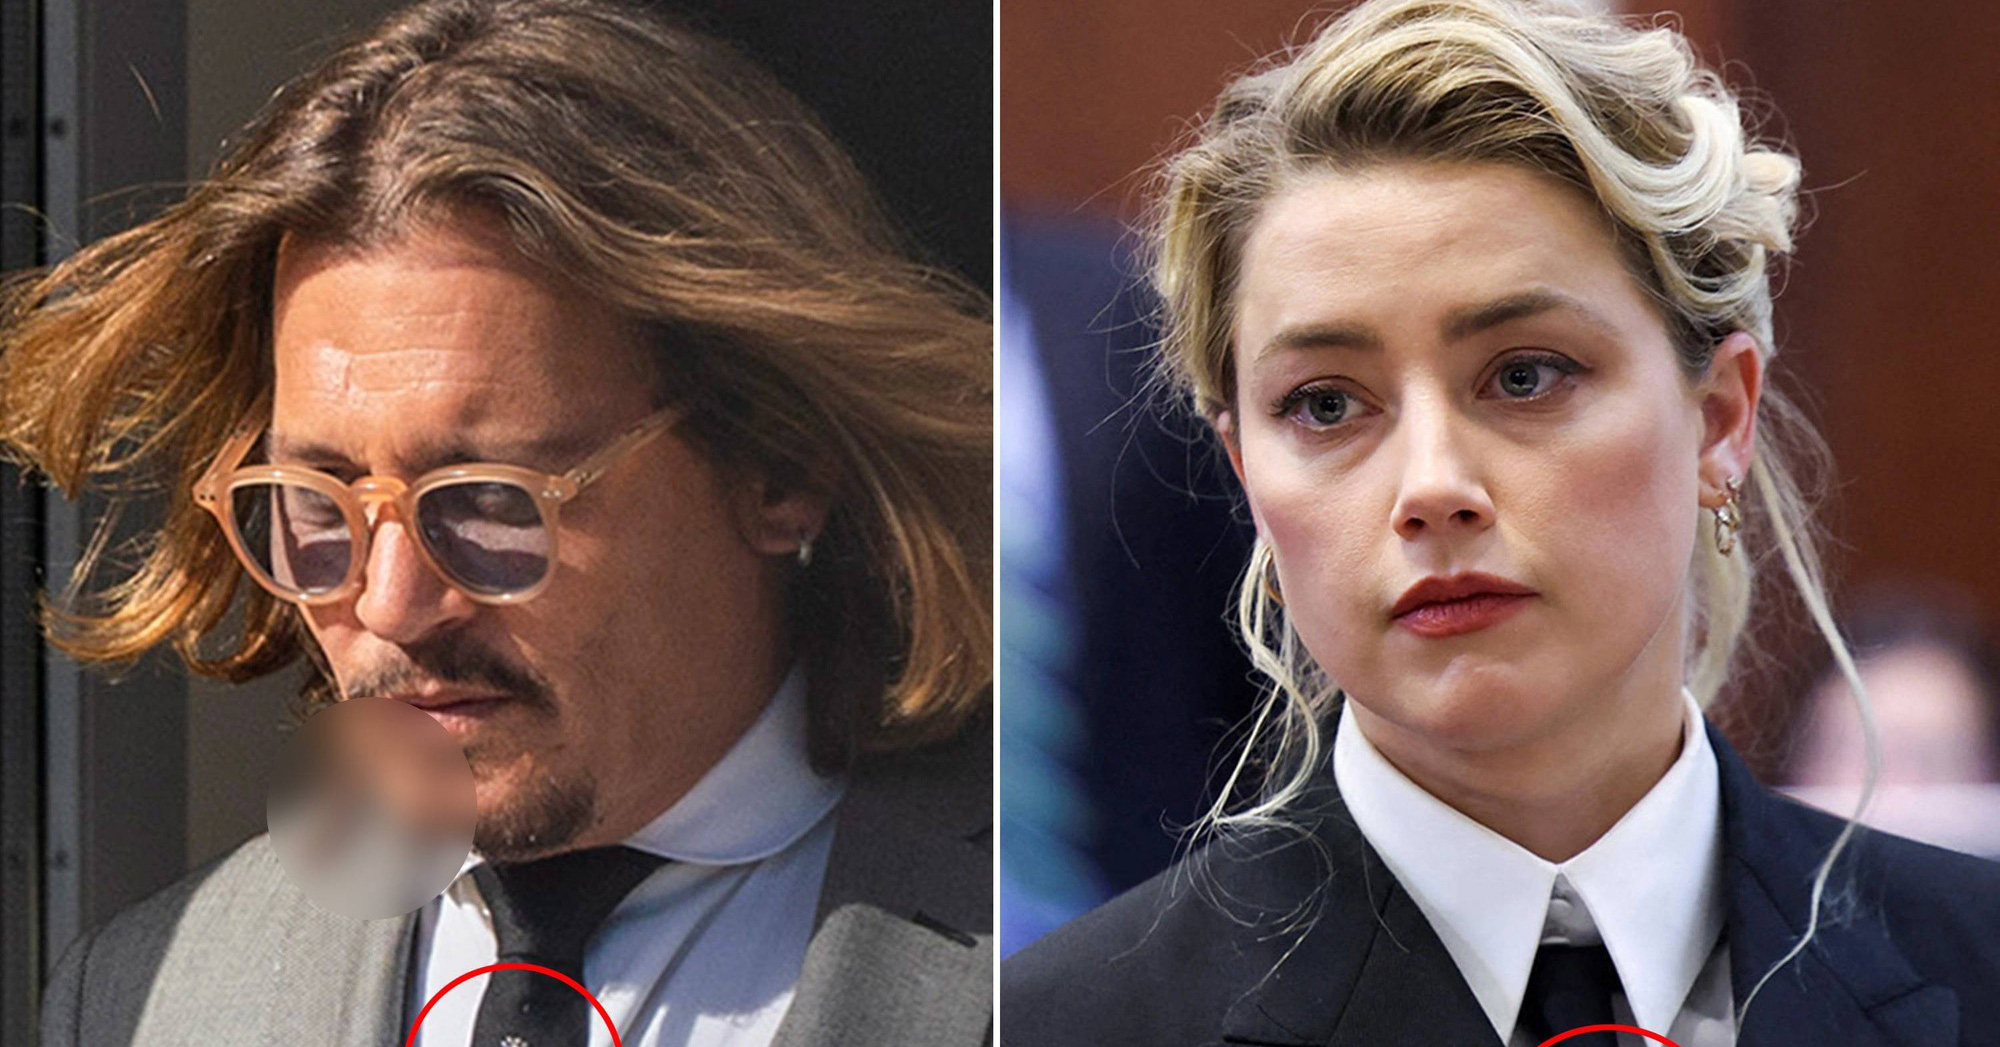 Actor Johnny Depp was “played psychologically” by his ex-wife when going to court